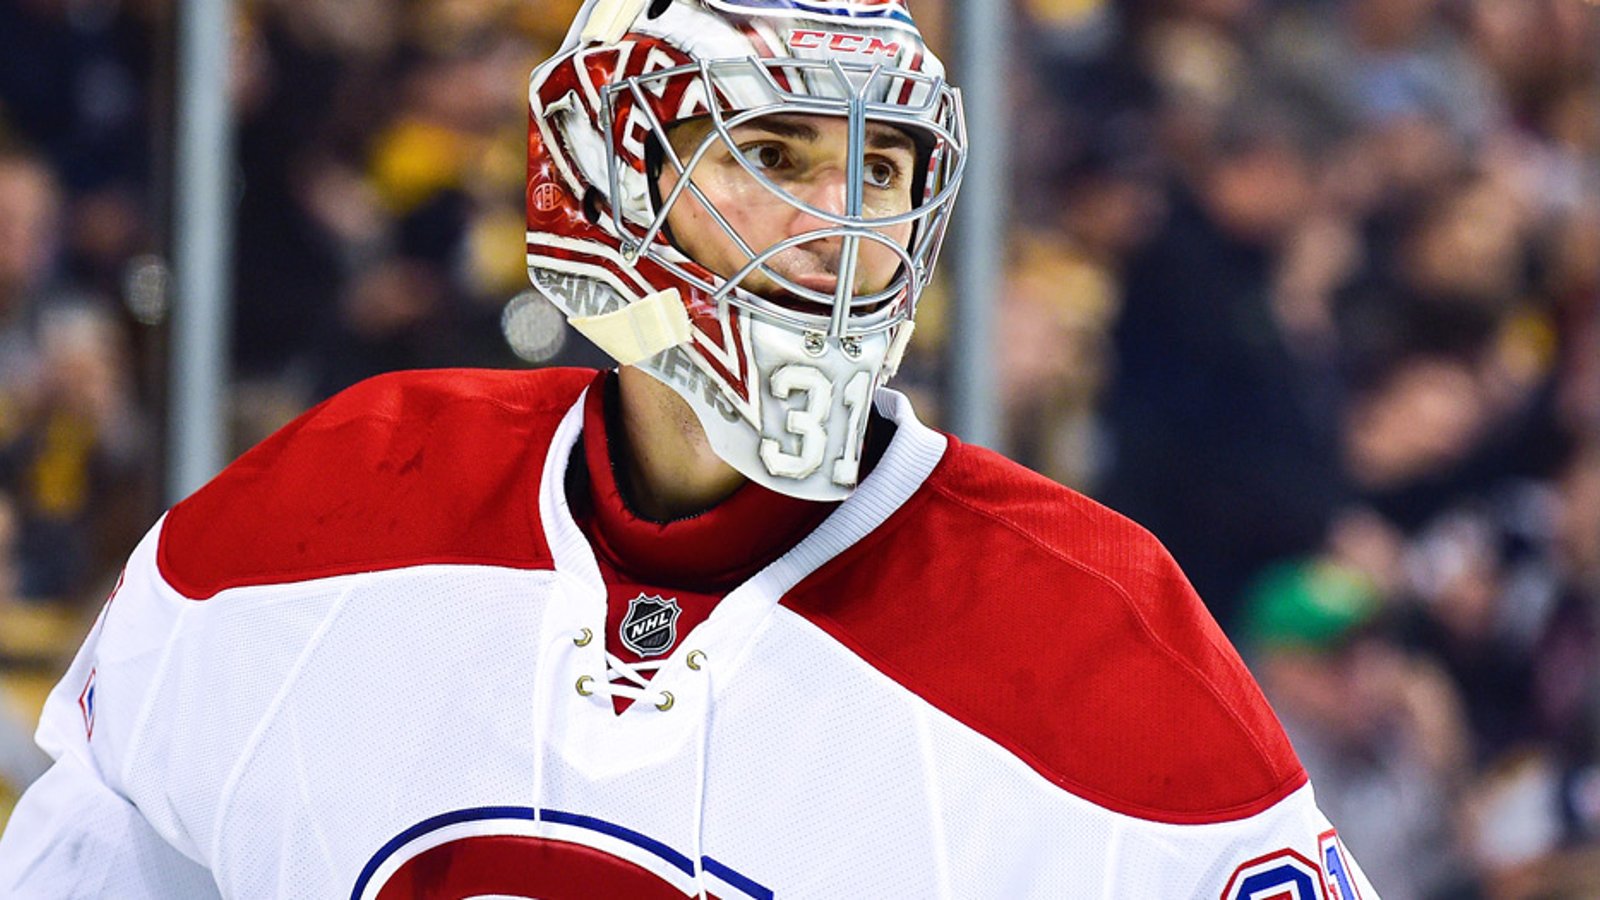 BREAKING: Carey Price benched tonight in must win game!